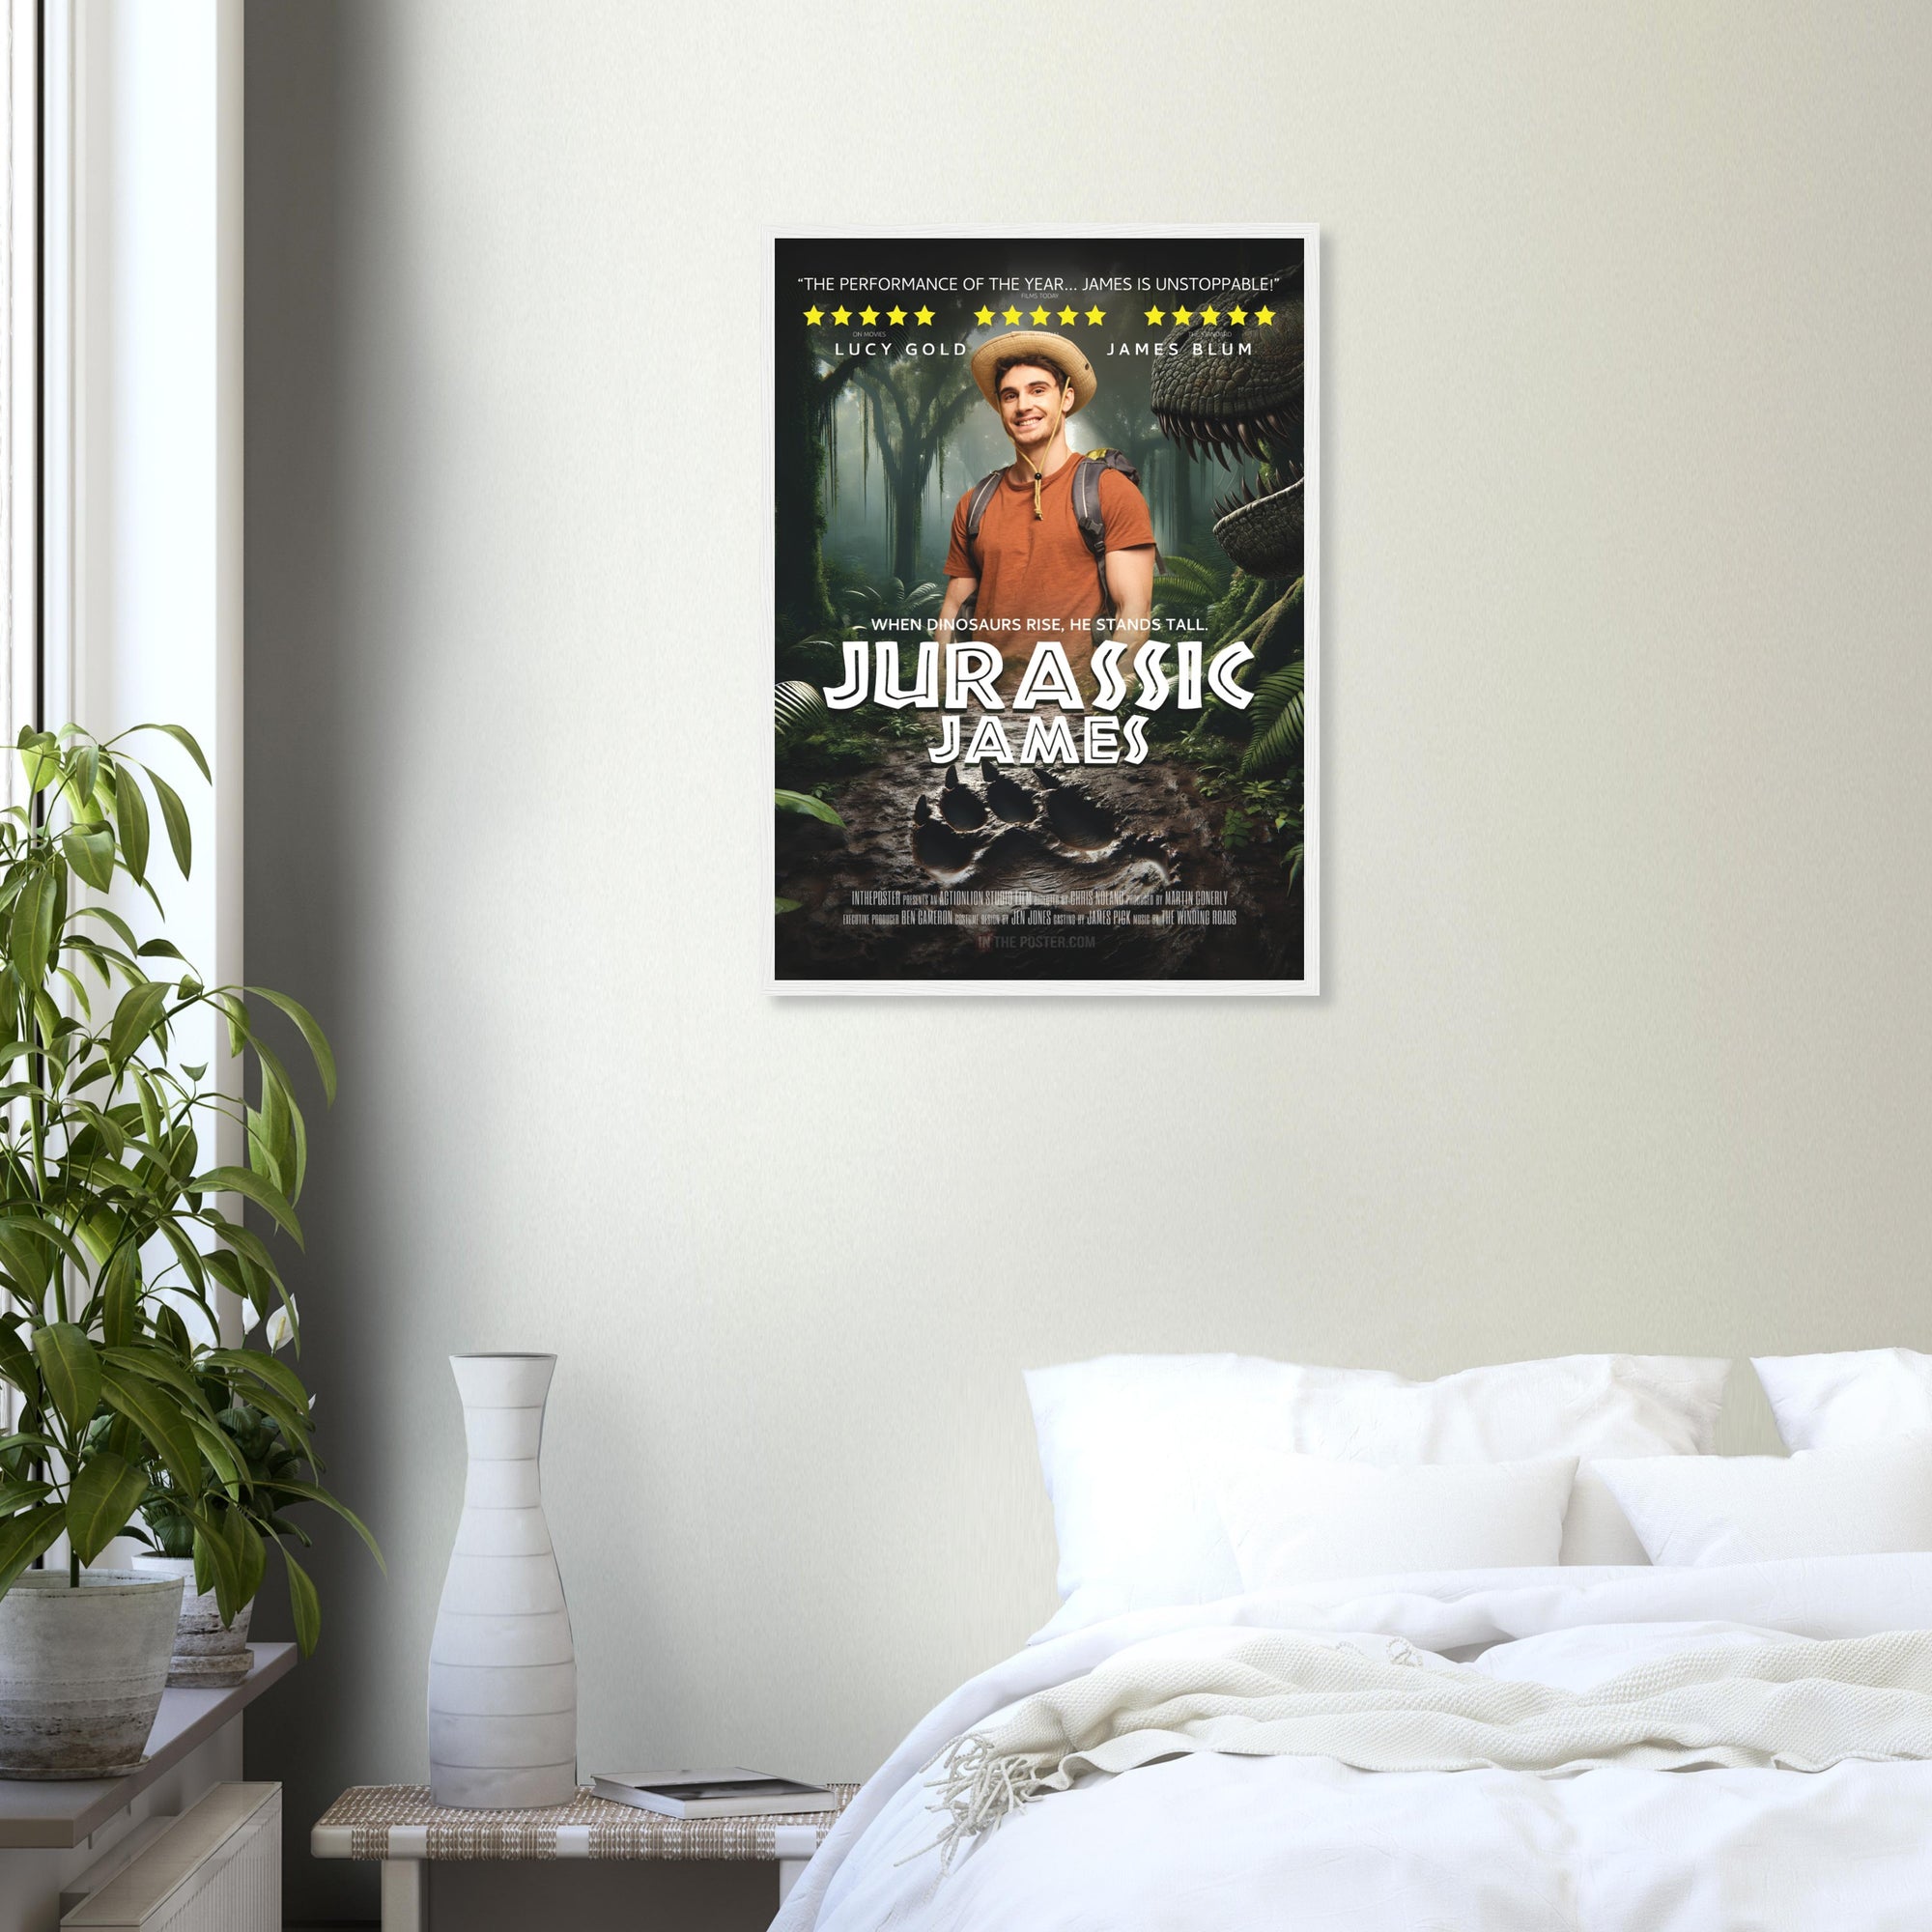 A dinosaur movie poster in a white frame is on a grey wall above a plant and a white bed.